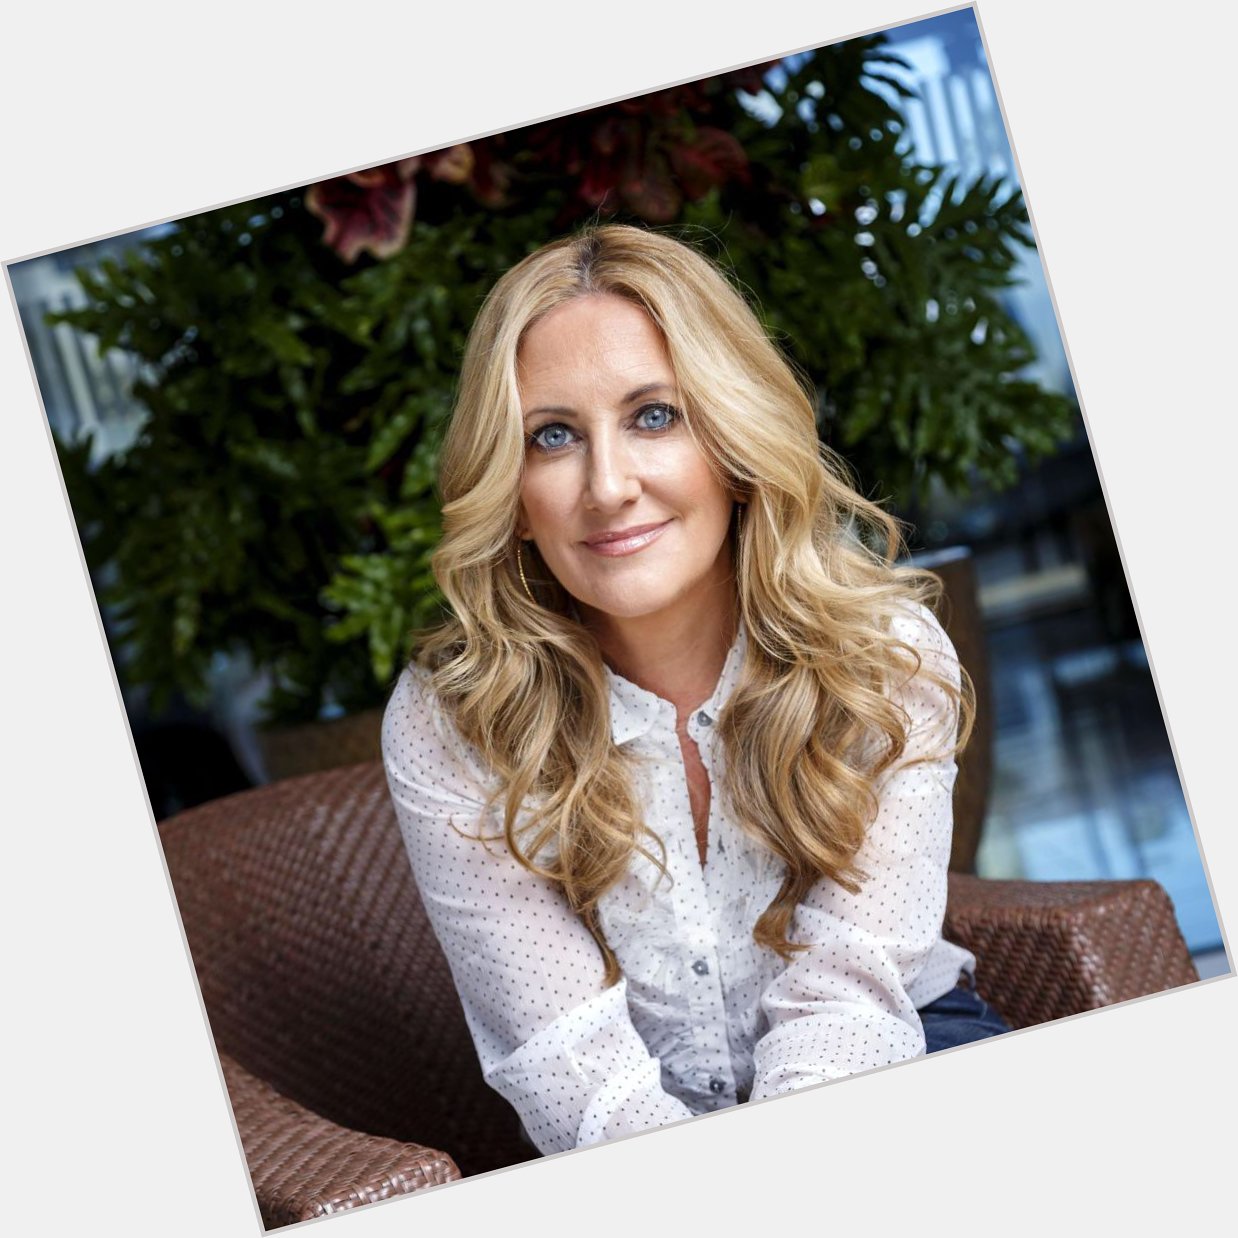 Wishing a Happy Birthday to Lee Ann Womack. She turns 52 today. 